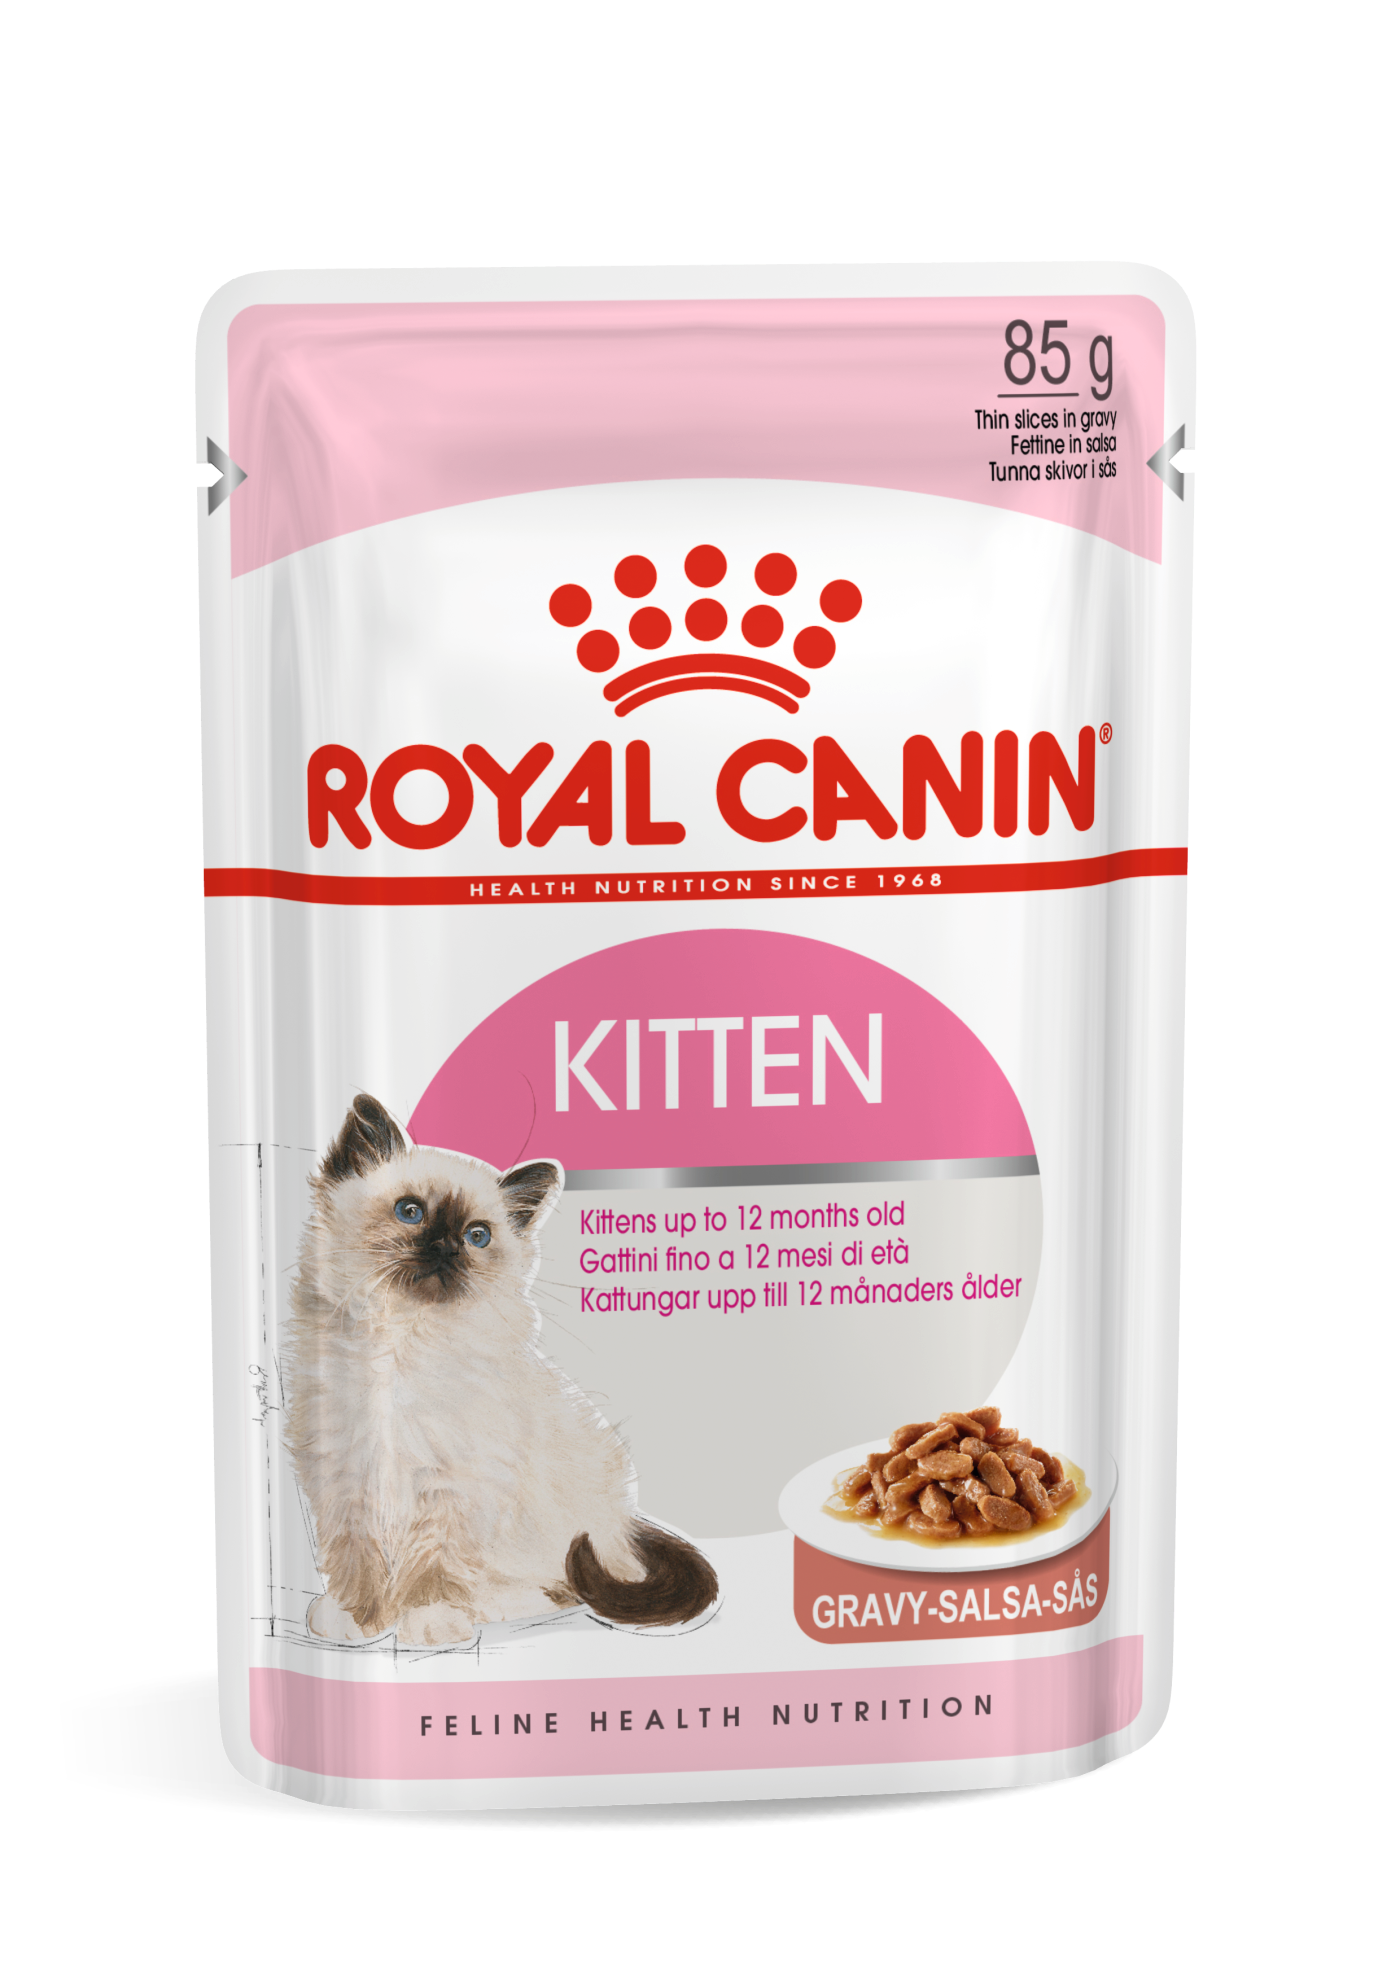 royal canin mom and kitten